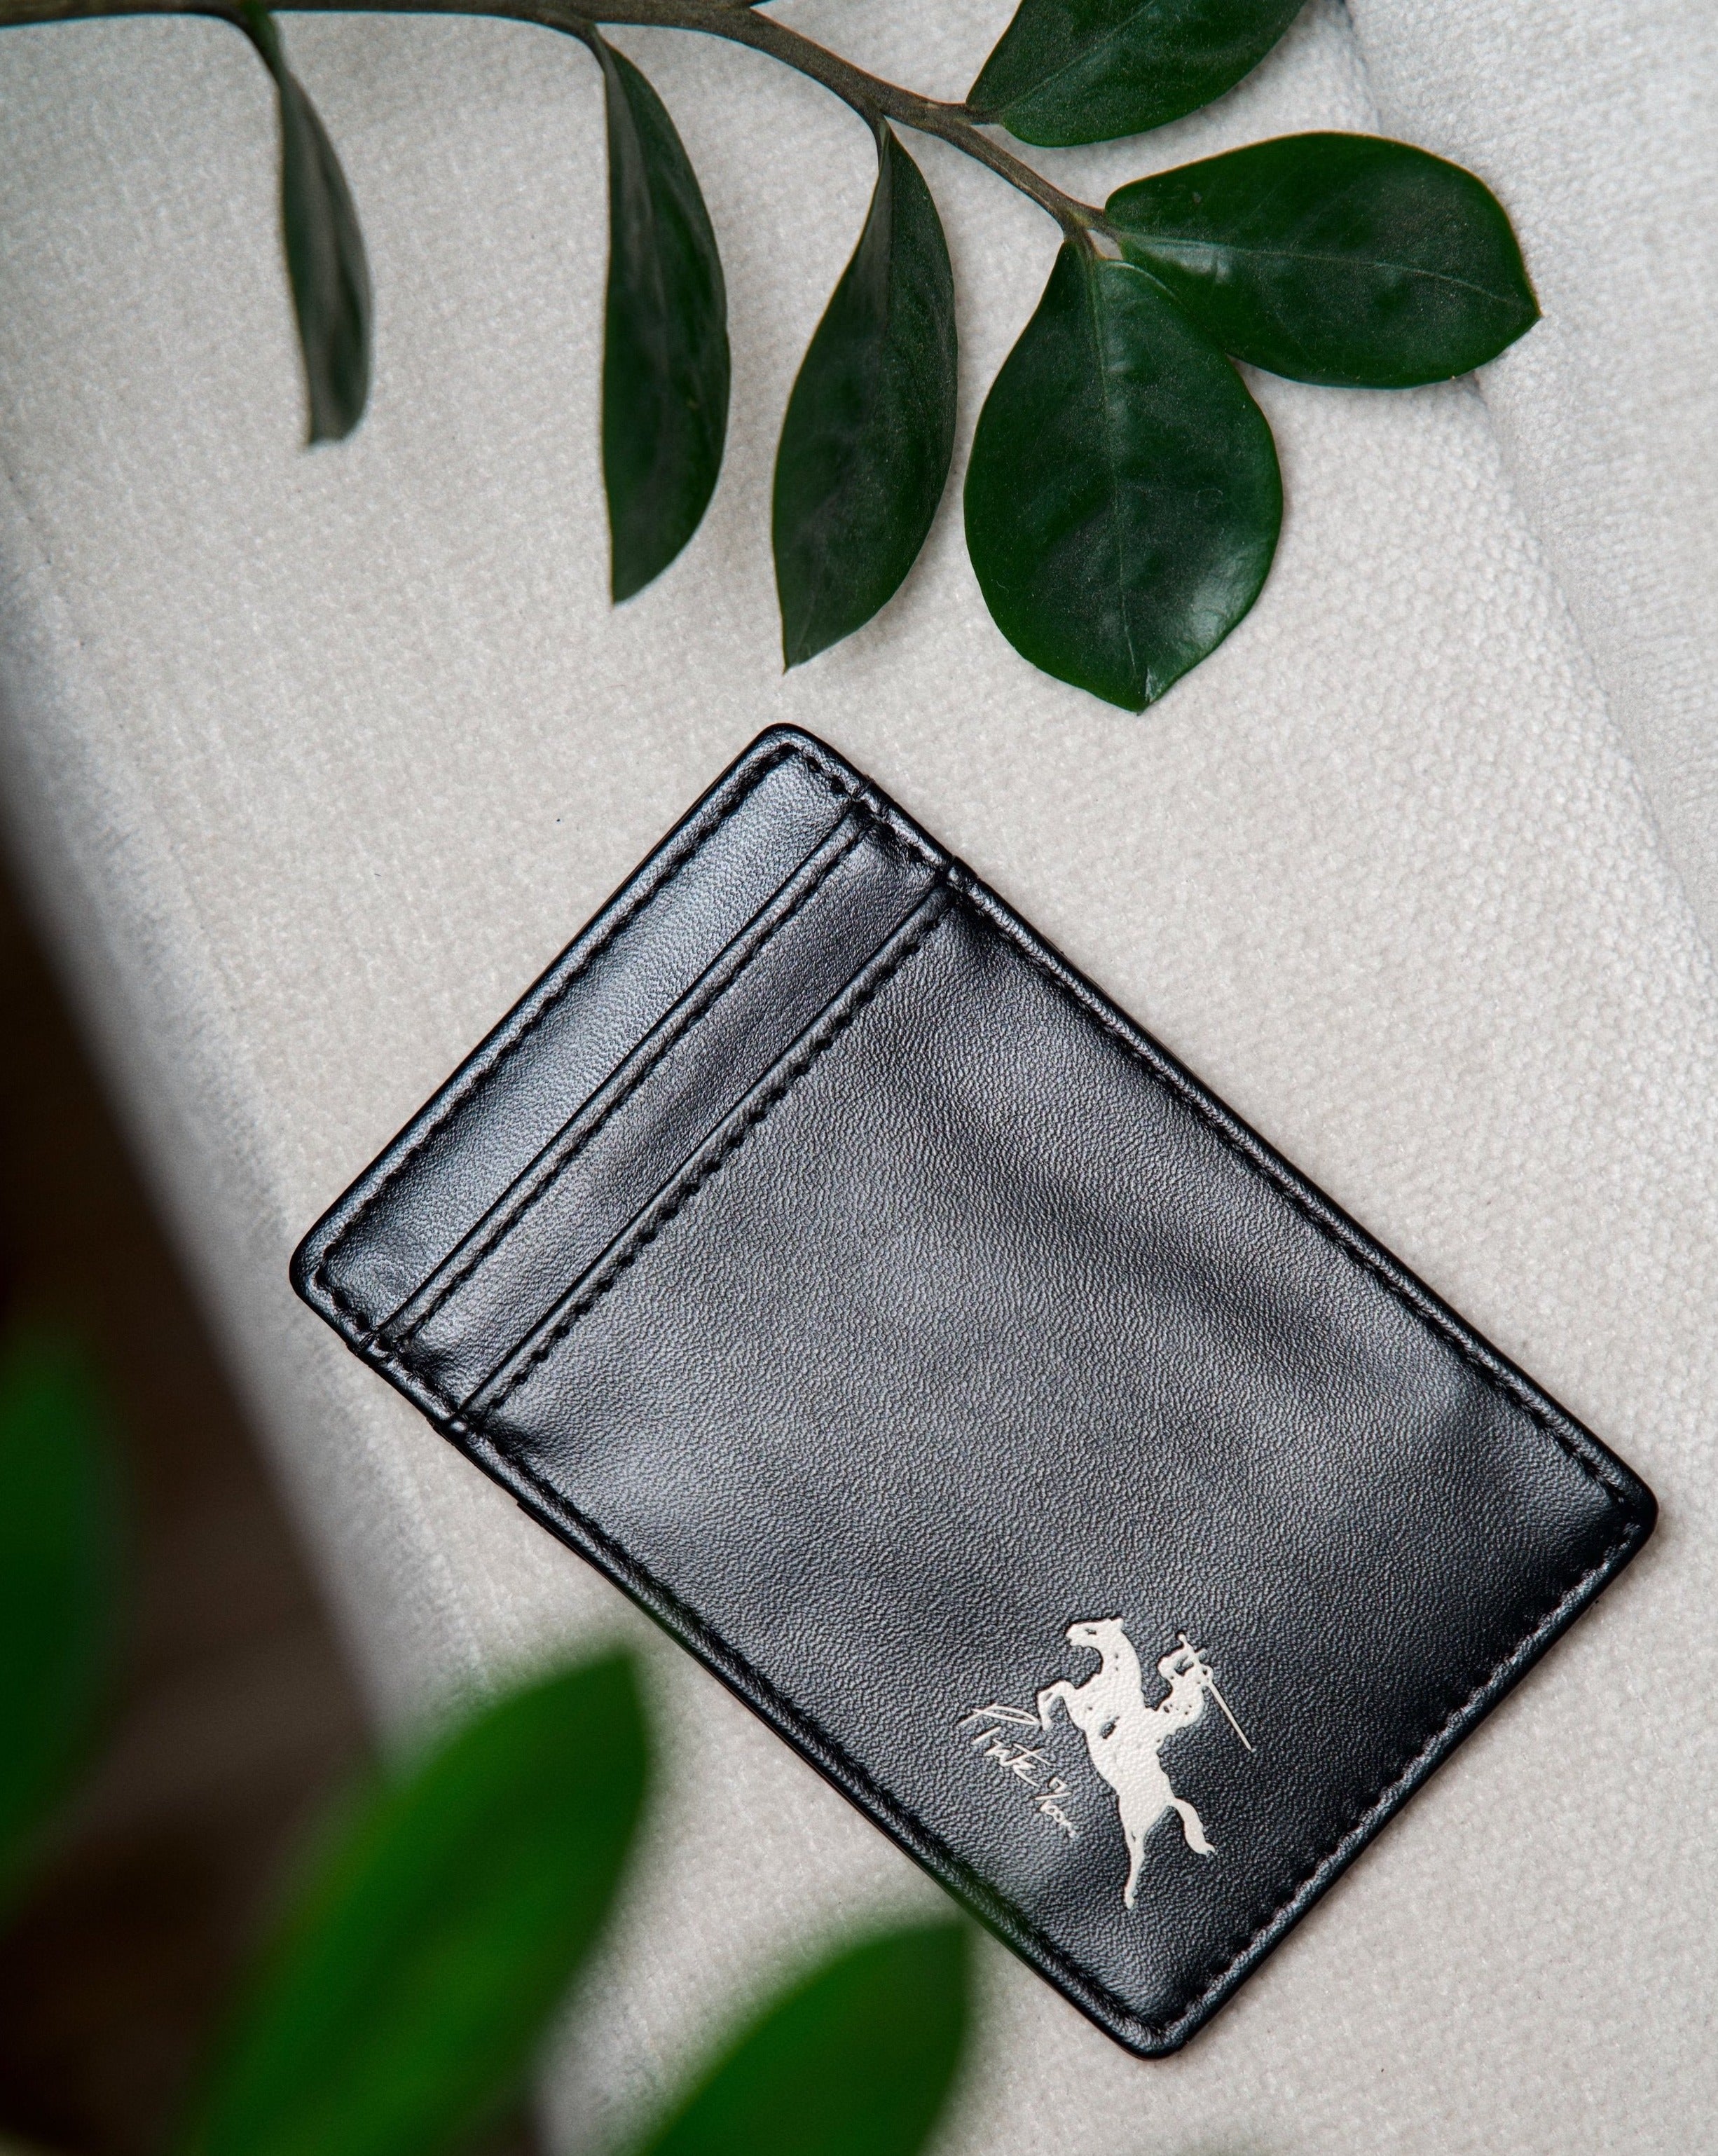 Pirate "By Any Means" Leather Card Holder